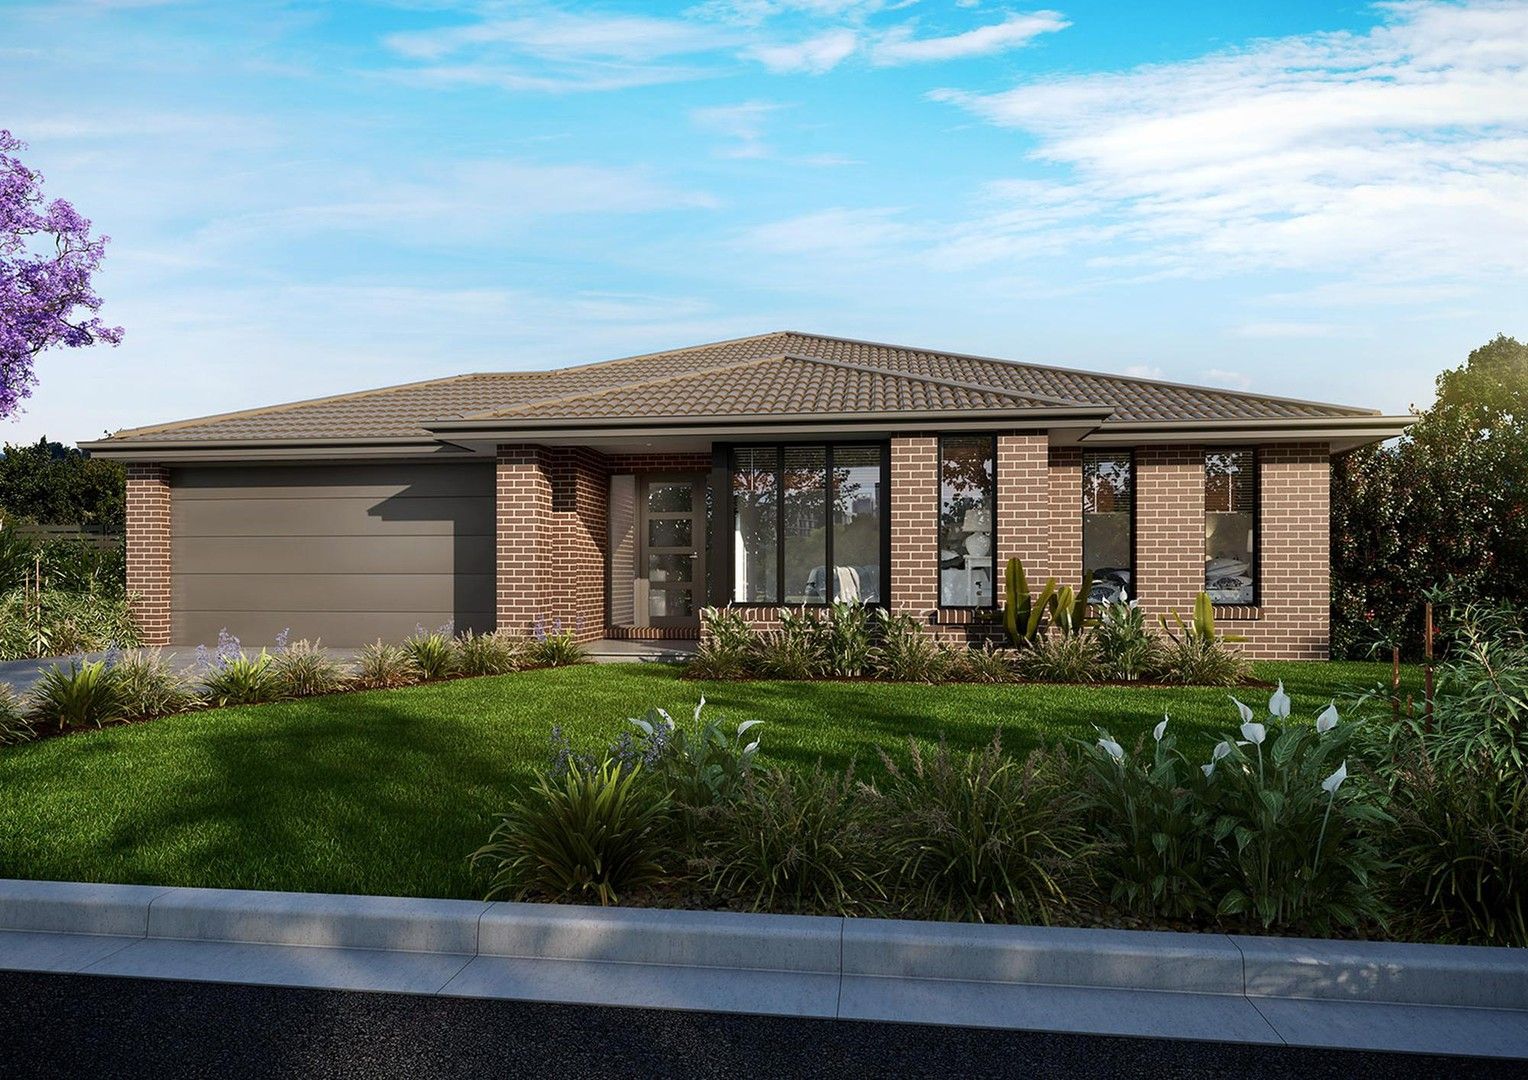 4 bedrooms New House & Land in 2405 Riverfield Square Estate CLYDE NORTH VIC, 3978